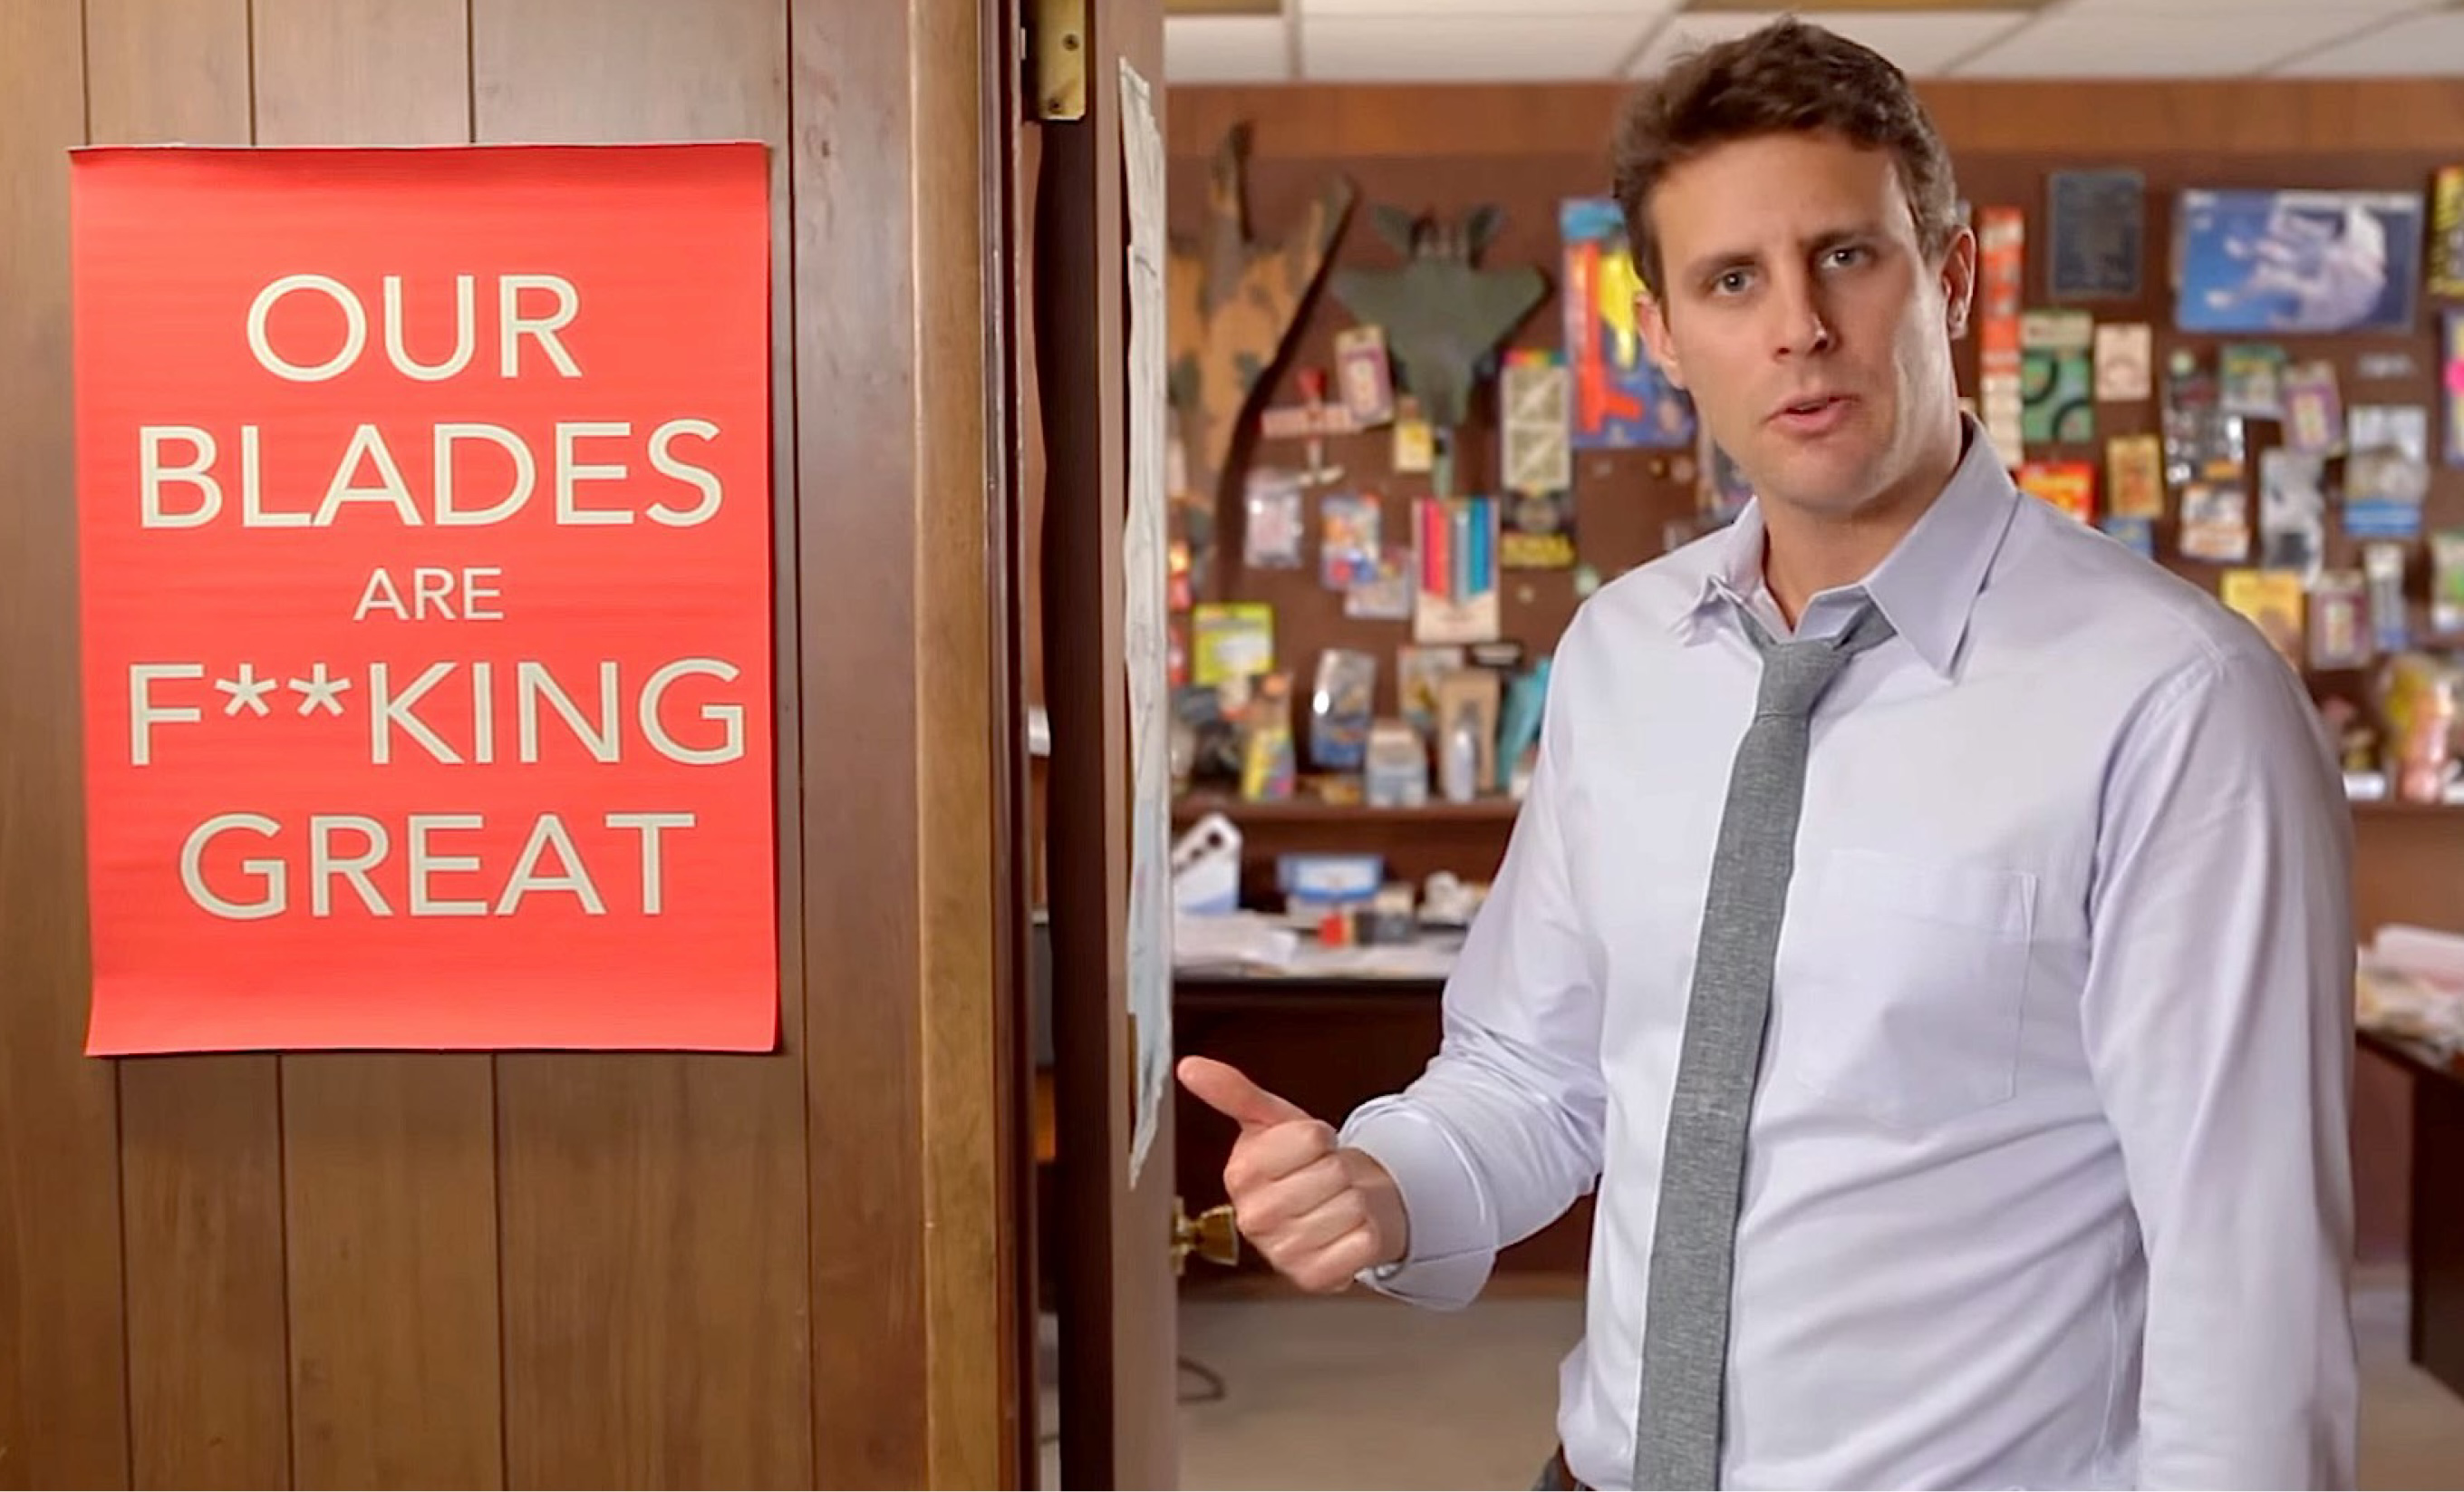 Dollar Shave Club was unabashedly "cheap but good," and didn't care about sleek advertising like Gillette. It got everyone's attention because it was such a clear message, and sold razors to everyone, not cost-conscious consumers only.